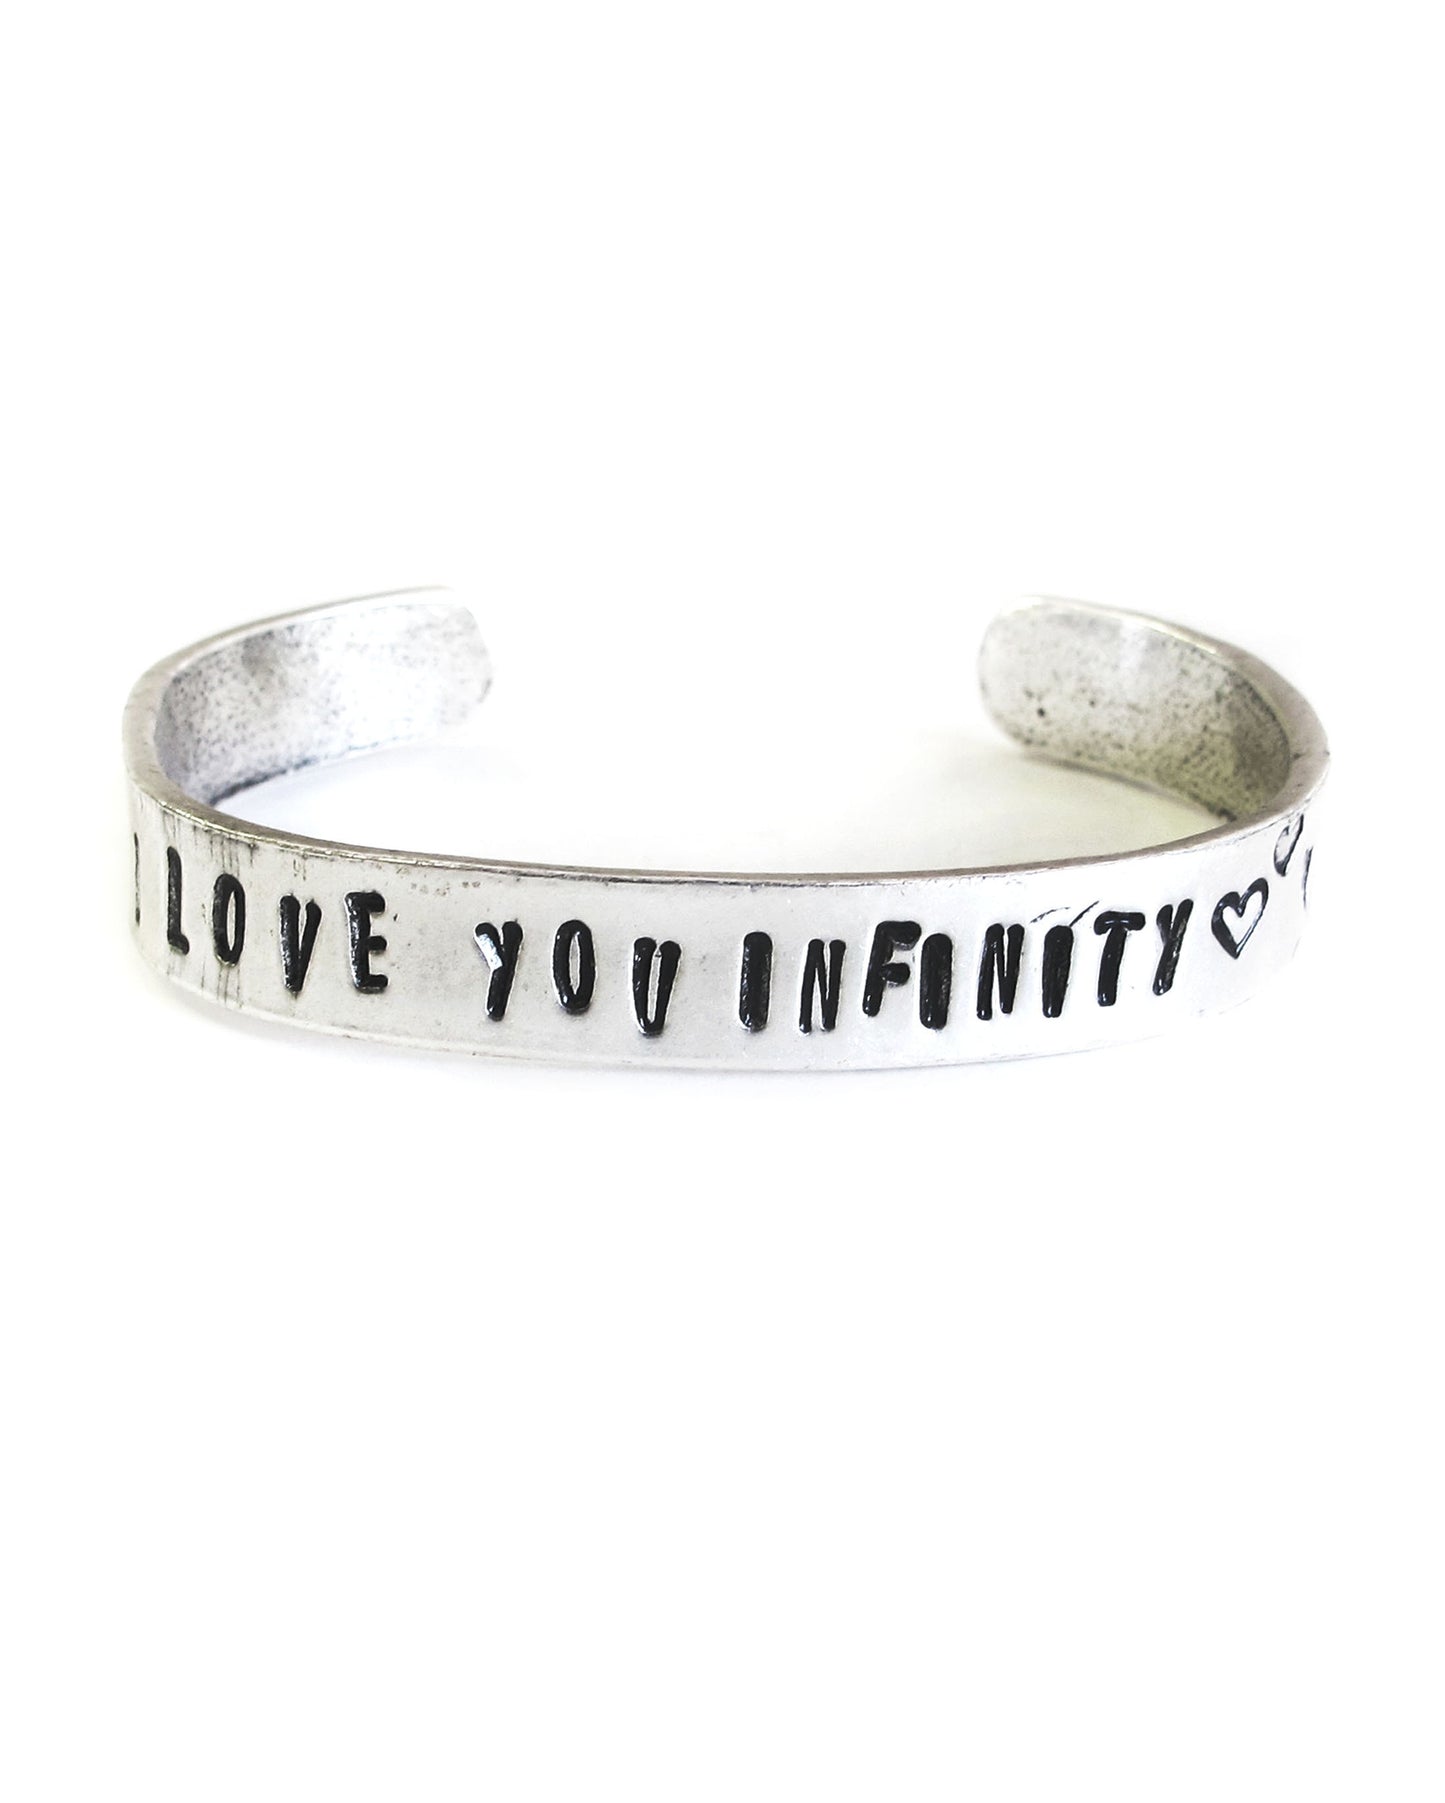 I Love You Infinity Hand Stamped Cuff